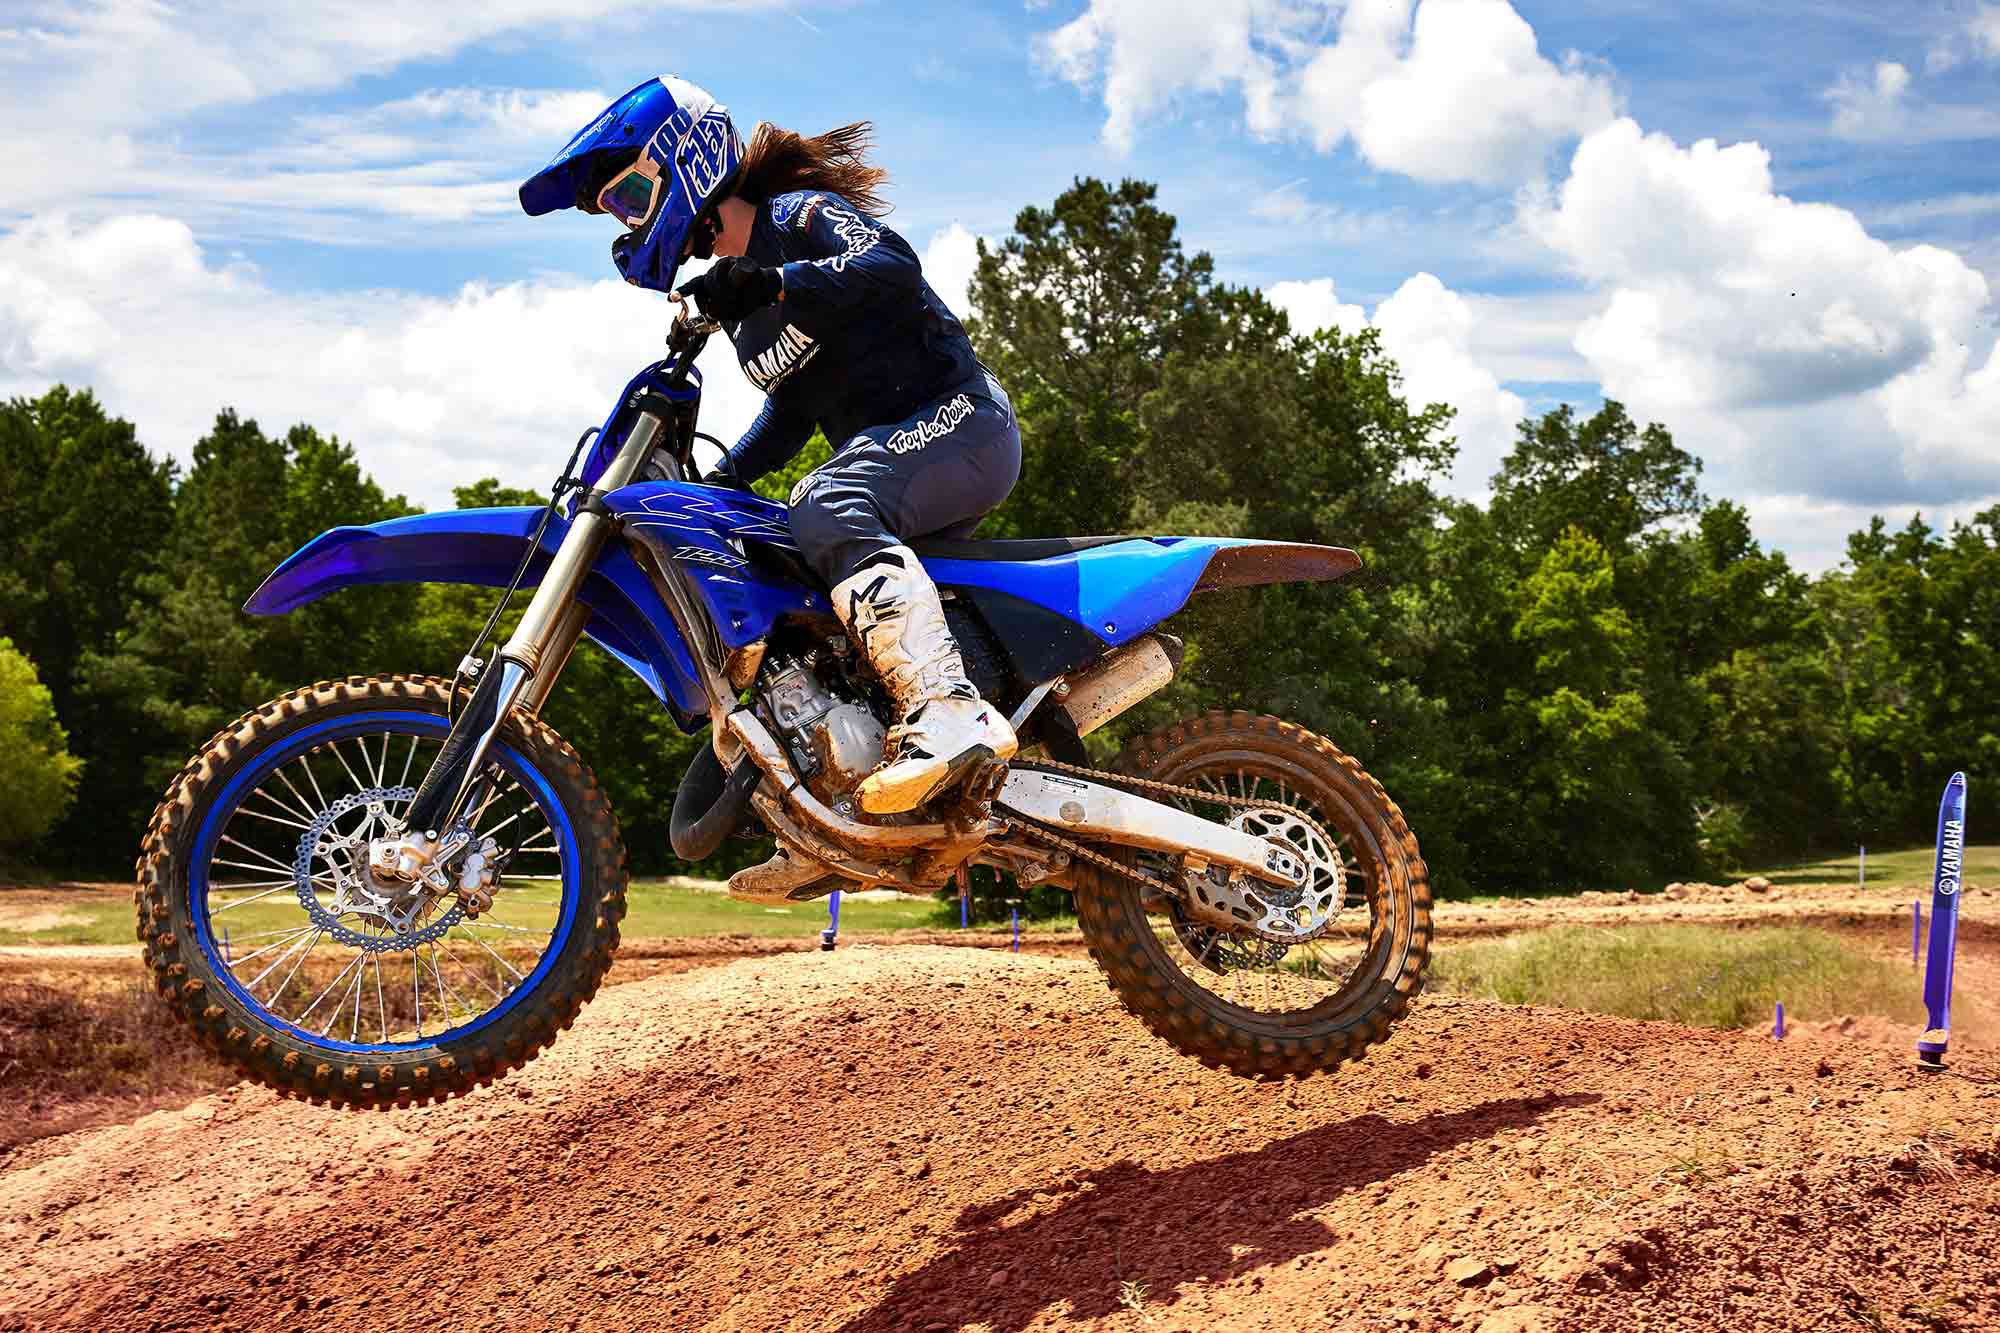 The new YZ125 gets a revised transmission and fueling components too.